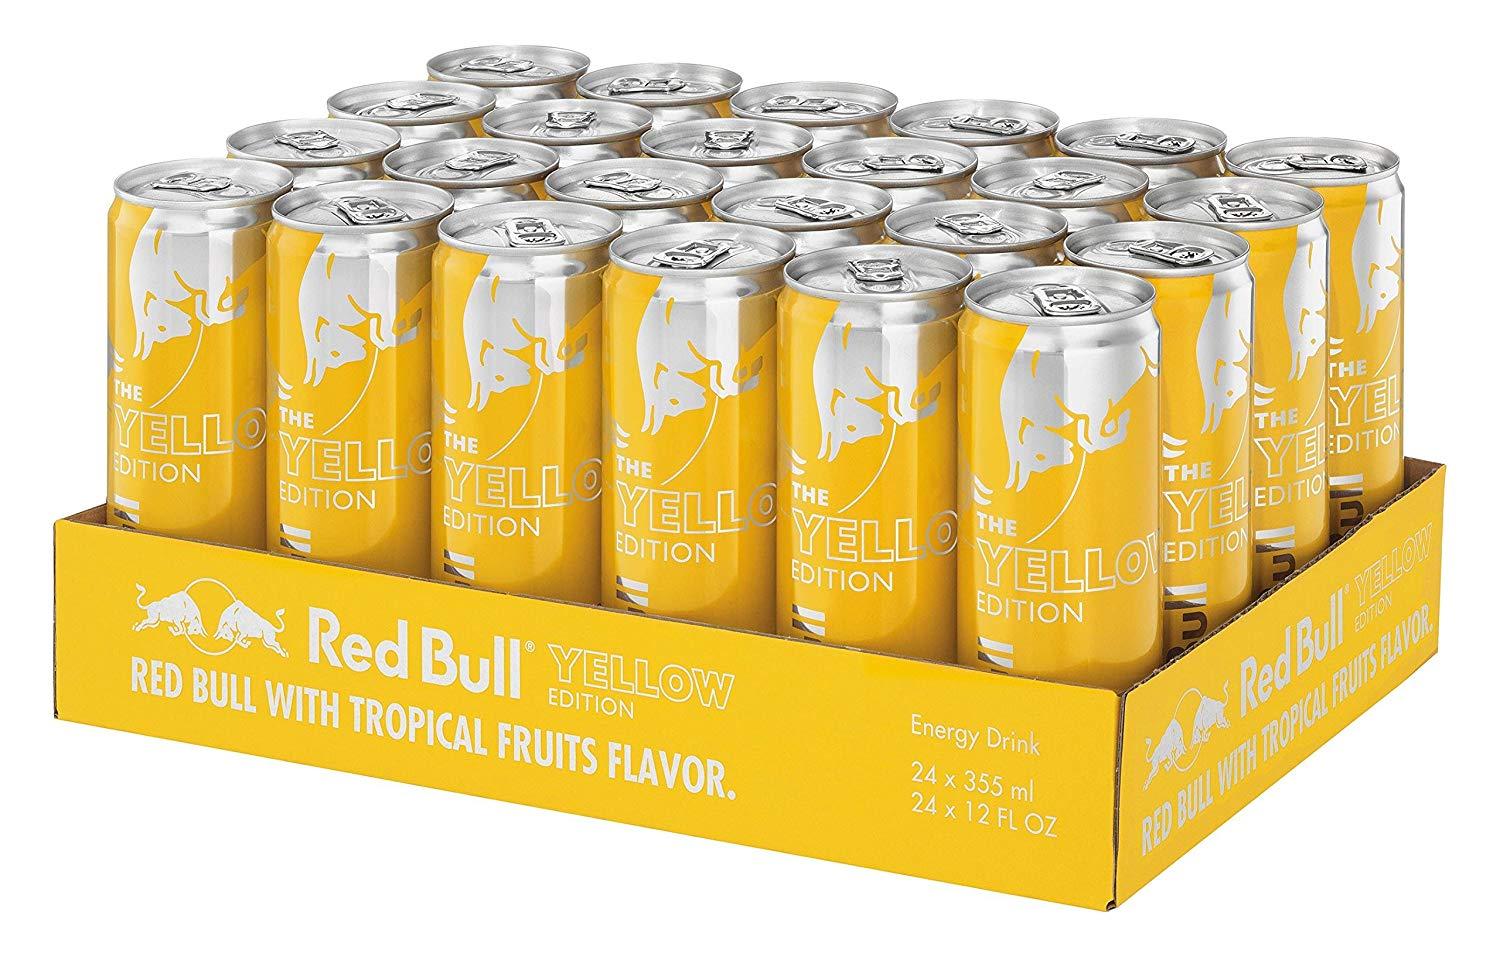 Red and Yellow Beverage Logo - Amazon.com : Red Bull Energy Drink, Tropical, 24 Pack of 12 Fl Oz ...